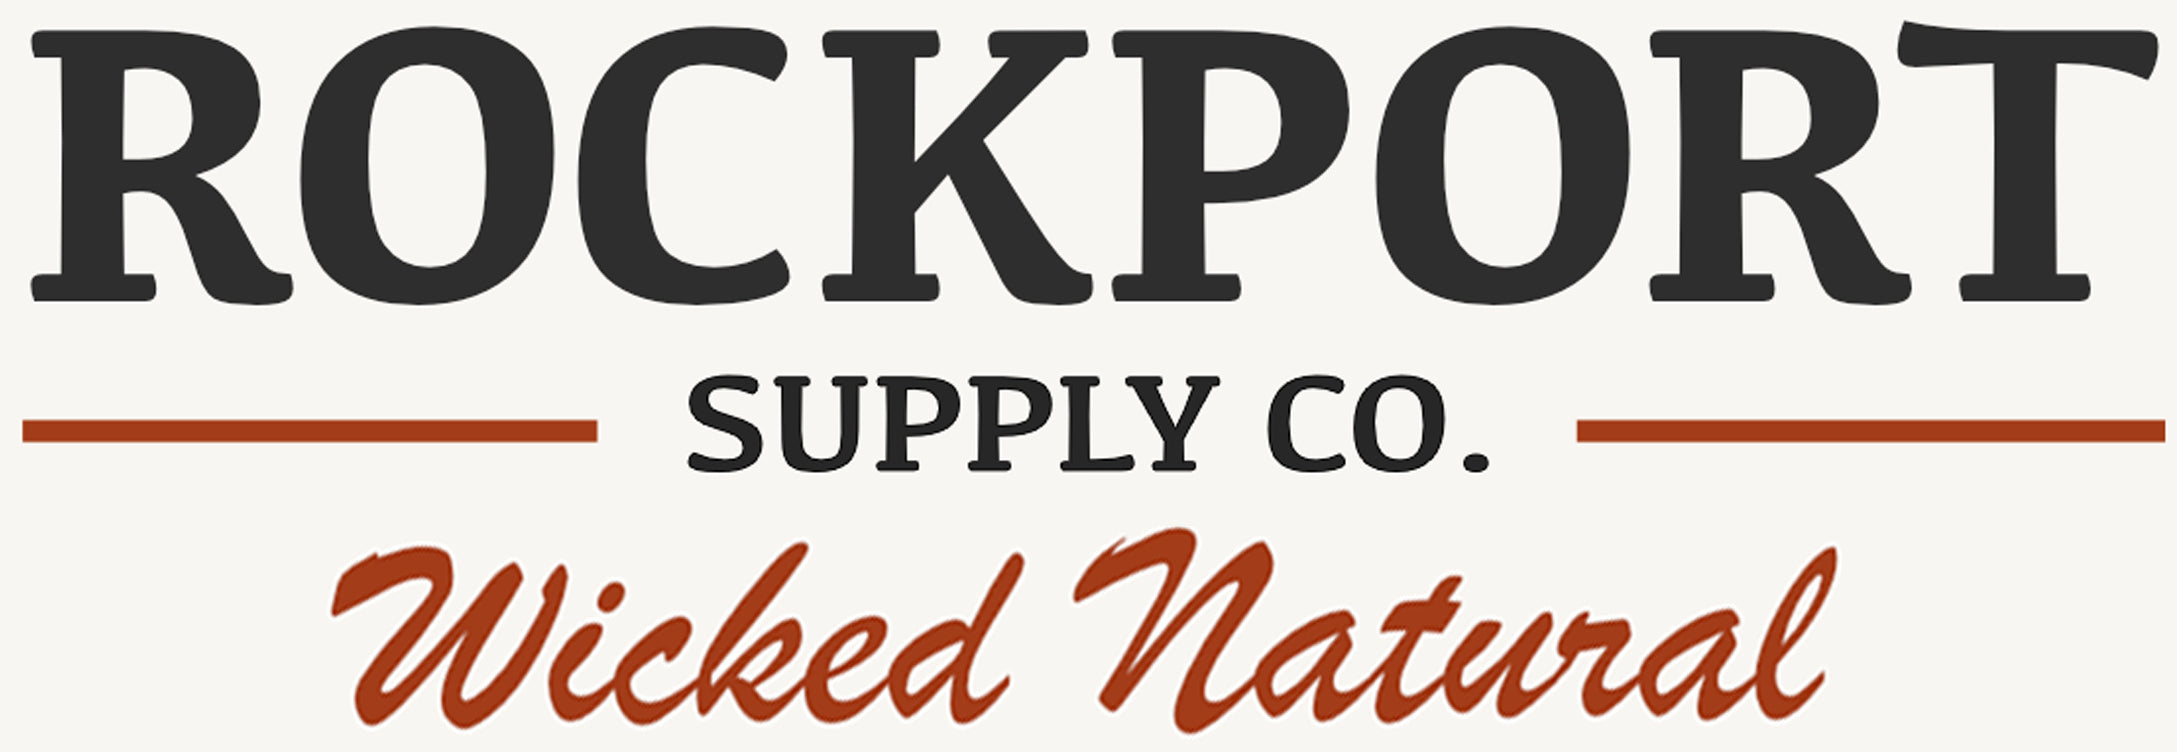 Rockport Supply Co.